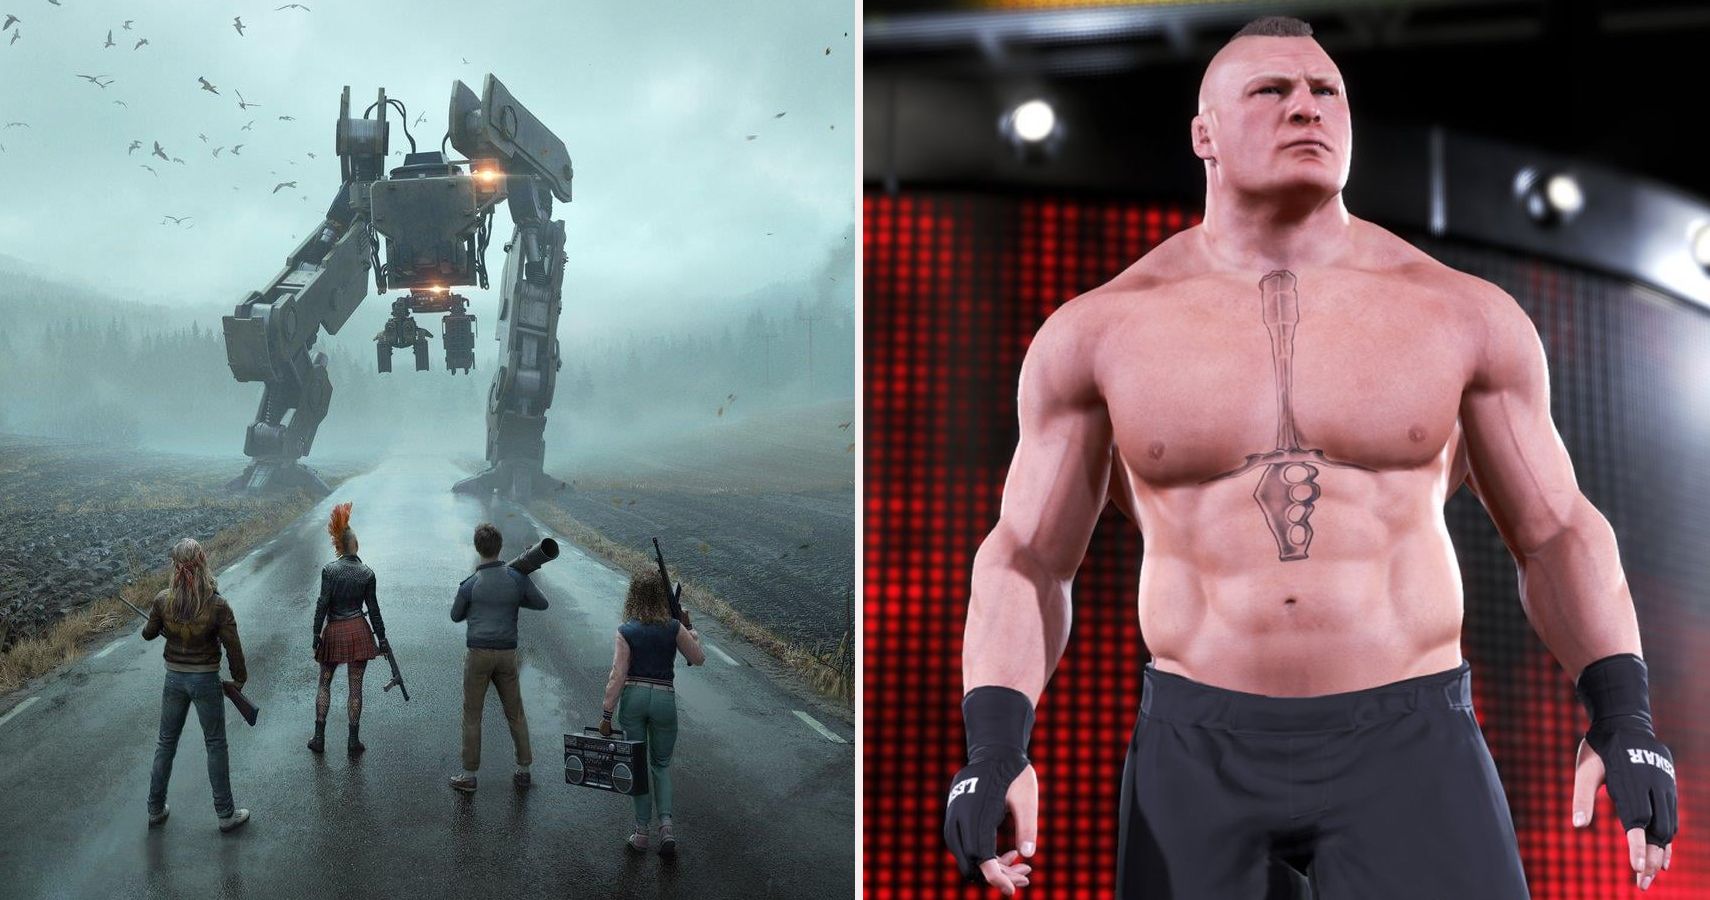 These Are the 10 Worst Games of the Year According to Metacritic